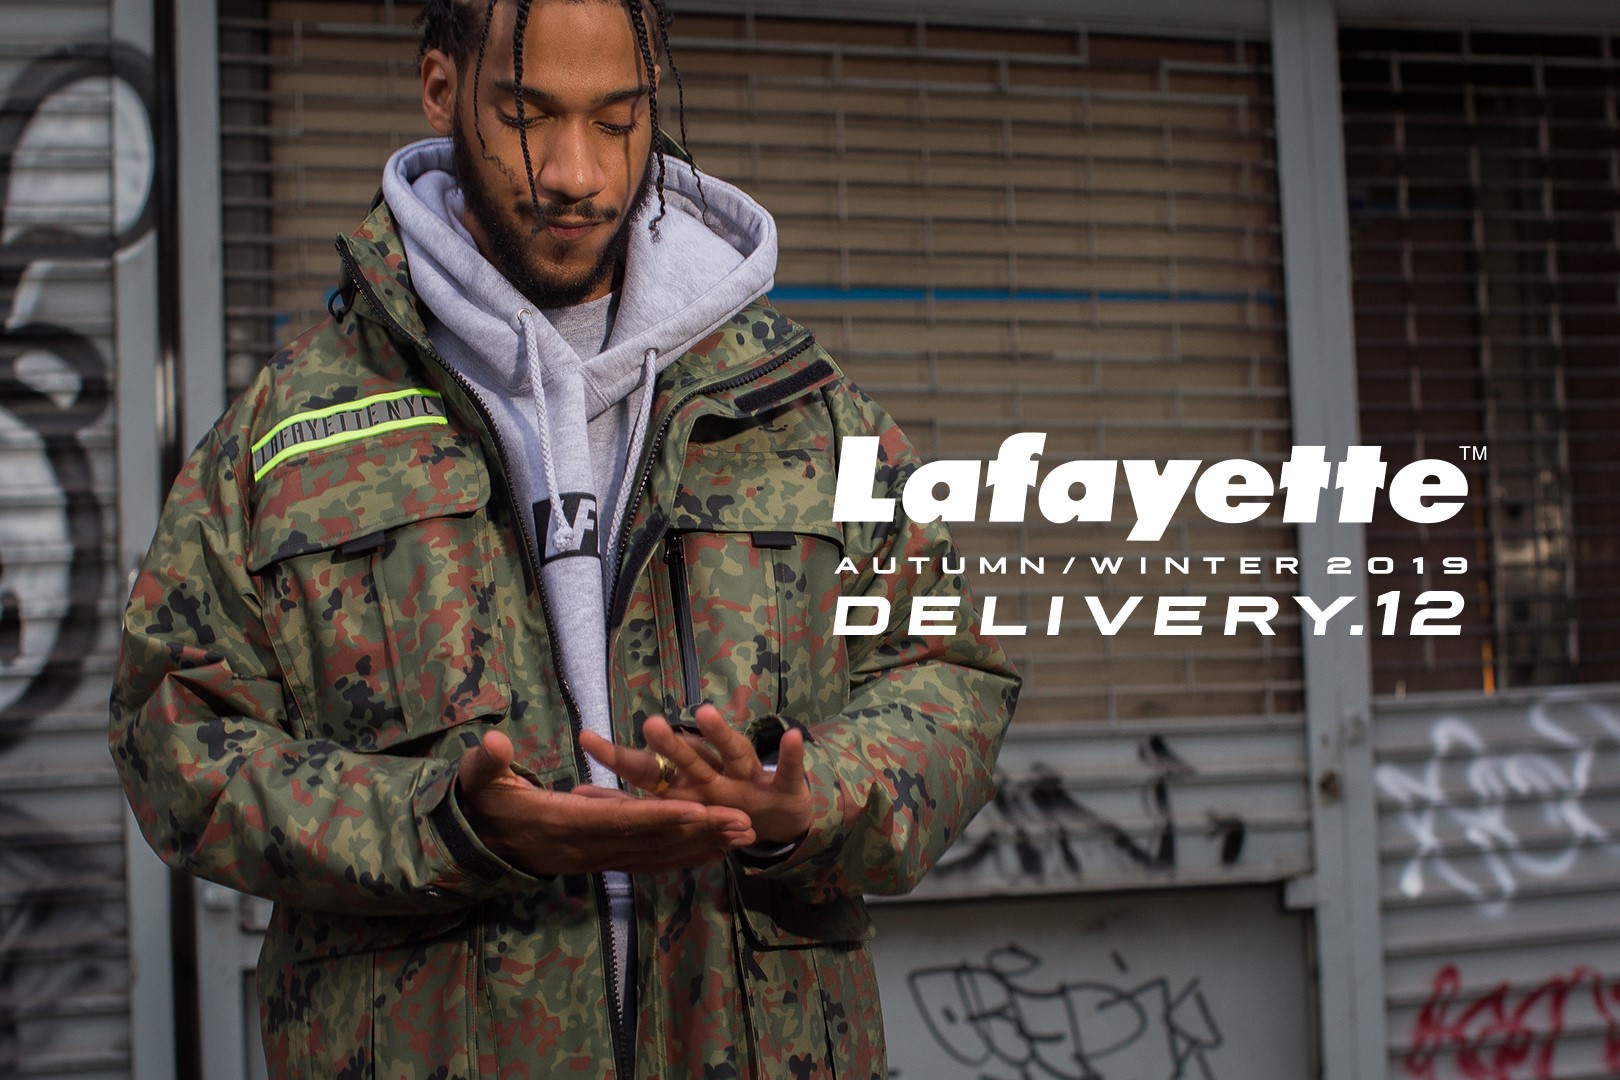 Lafayette 2019 Autumn/Winter Collection Delivery.12